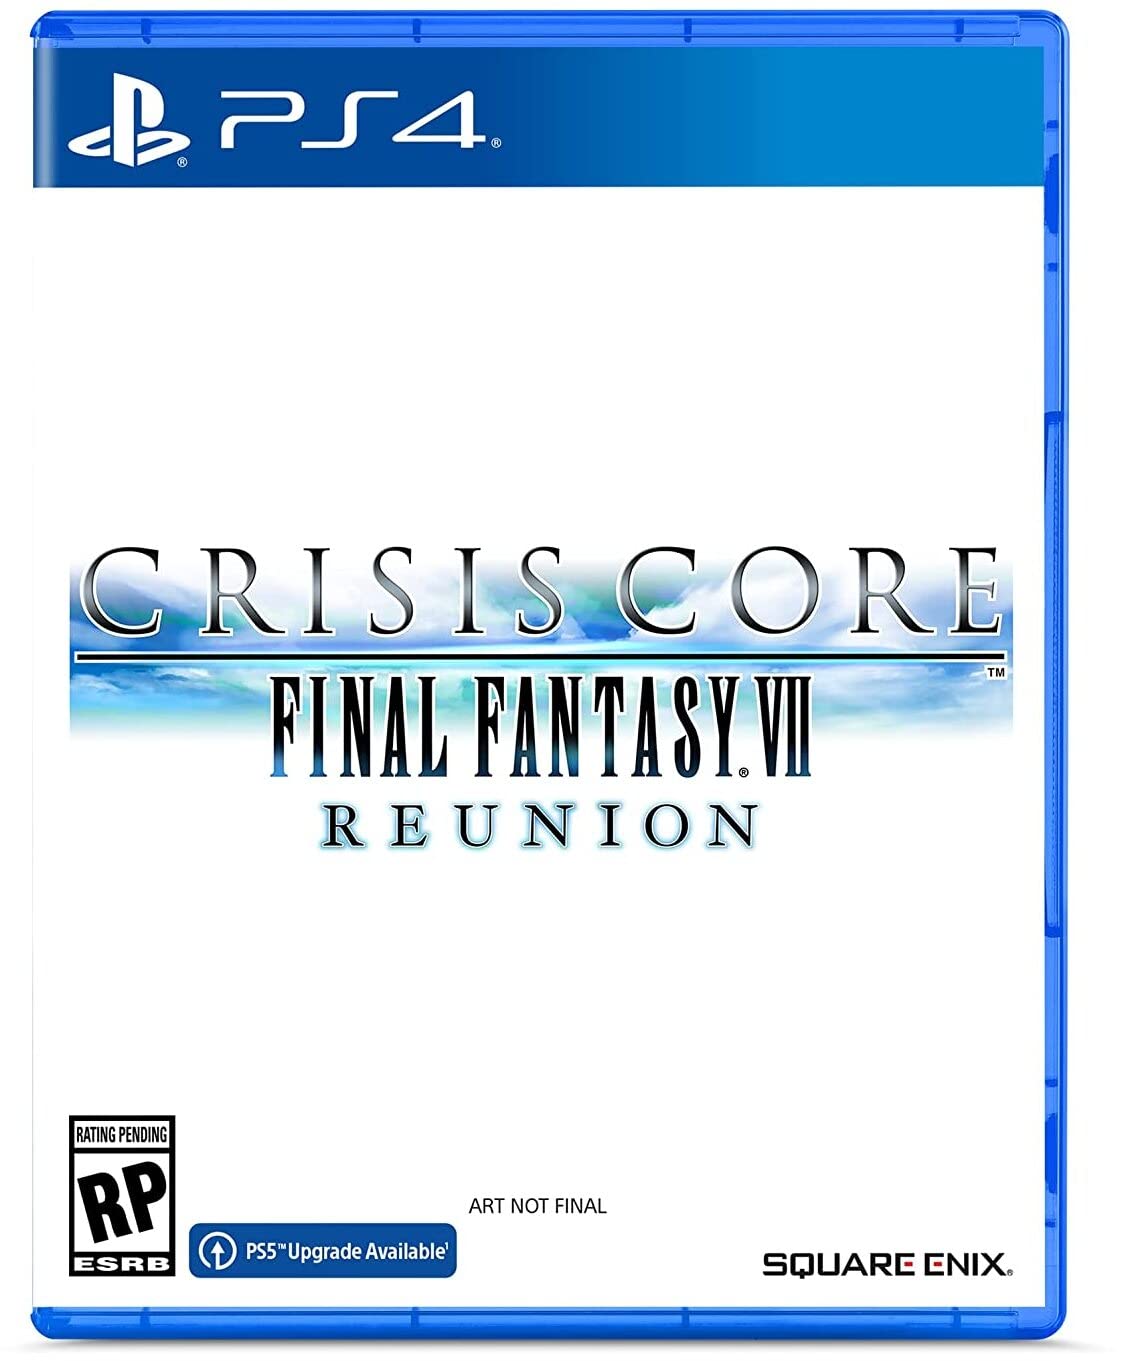 Amazon - $39.80 + F/S: Crisis Core: Final Fantasy VII Reunion PlayStation 4 with Free Upgrade to the Digital PS5 Version